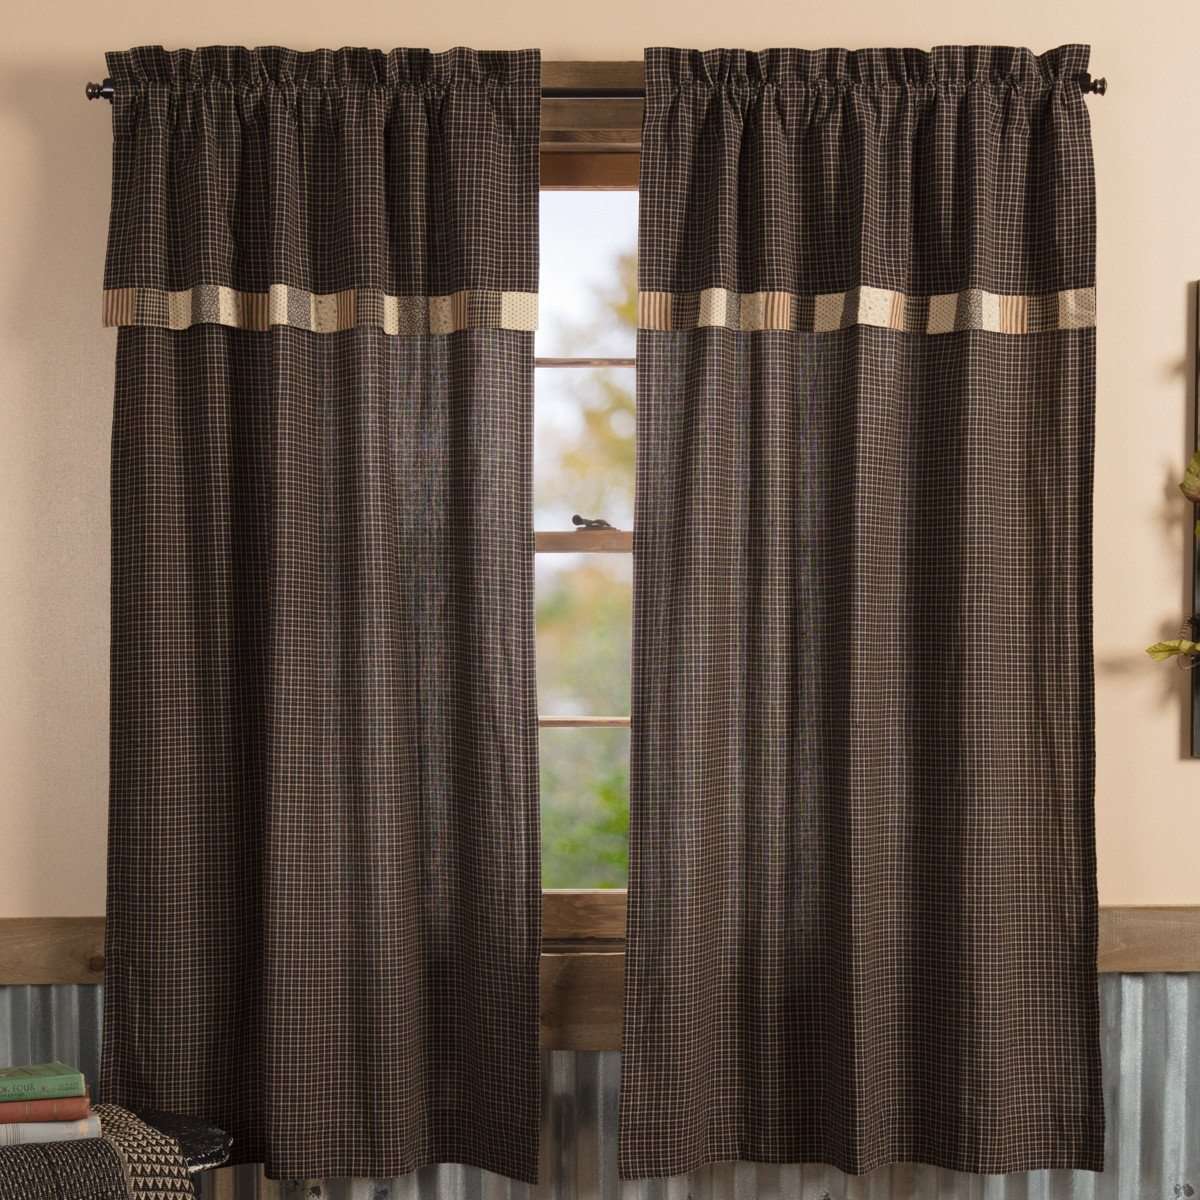 Kettle Grove Short Panel Curtain with Attached Valance Block Border Set of 2 36"x63" - The Fox Decor